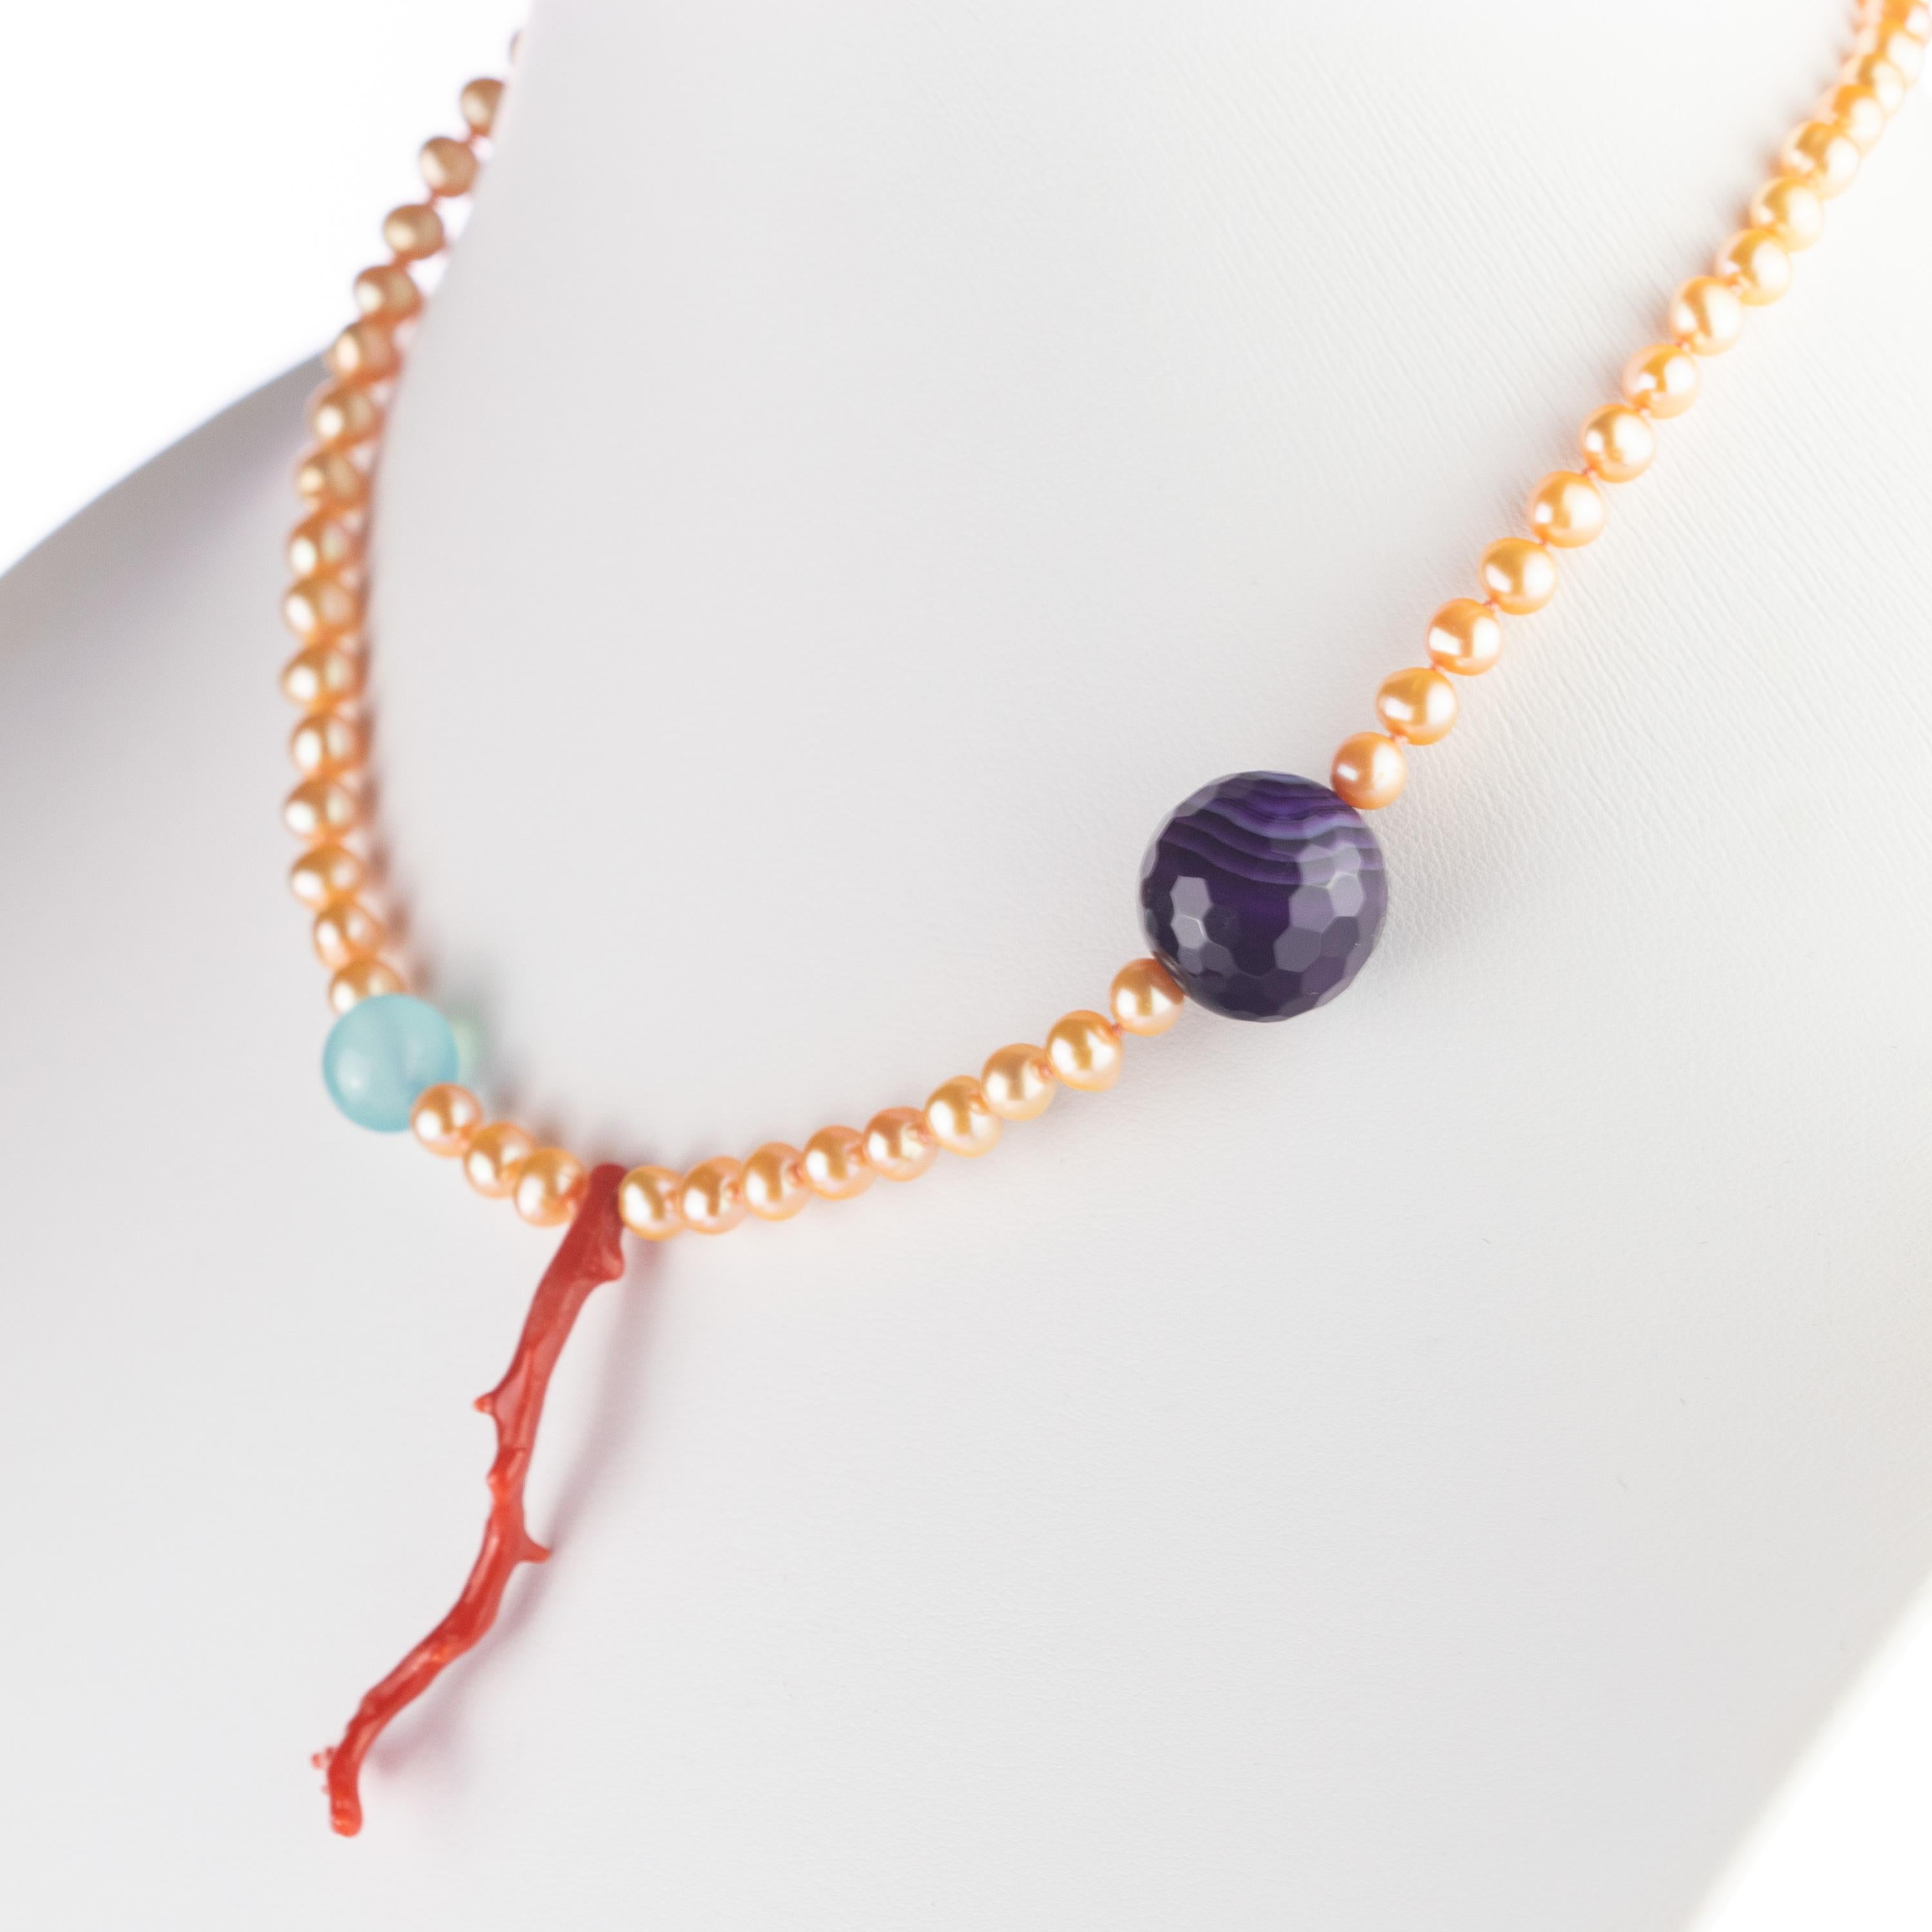 A timeless pearl design meets charming coral and blue / purple agate. Top quality materials for a Made in Italy iconic necklace. First class freshwater pearls with an elegant closure in 14k yellow gold. Modernity and glamour come together in one